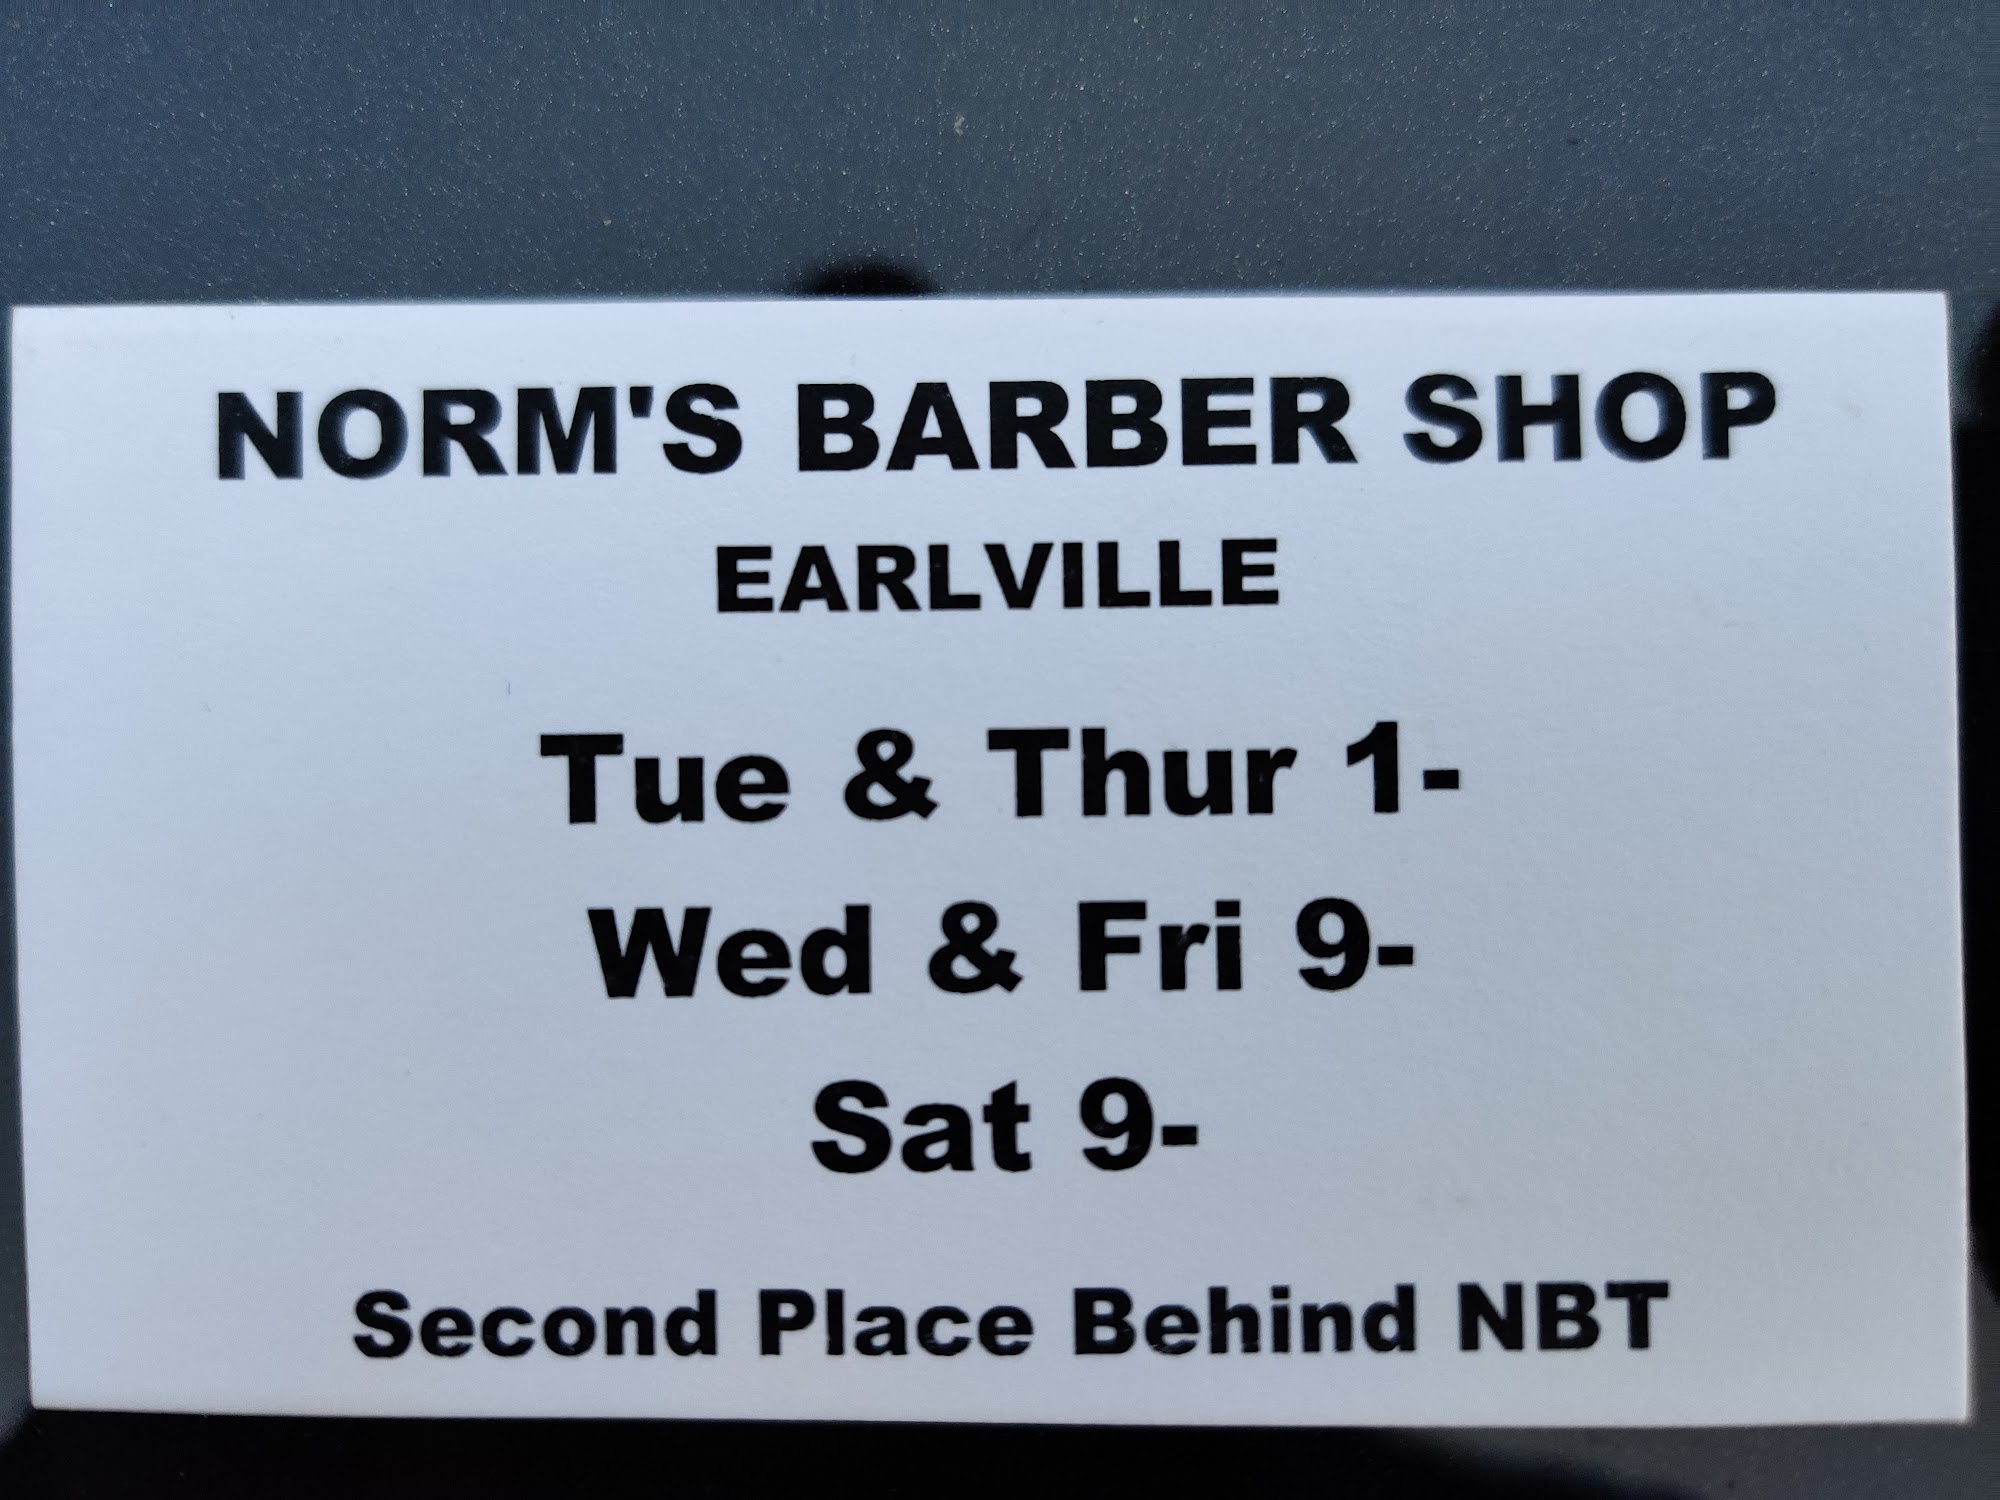 Norm's Barber Shop 5 W Main St, Earlville New York 13332